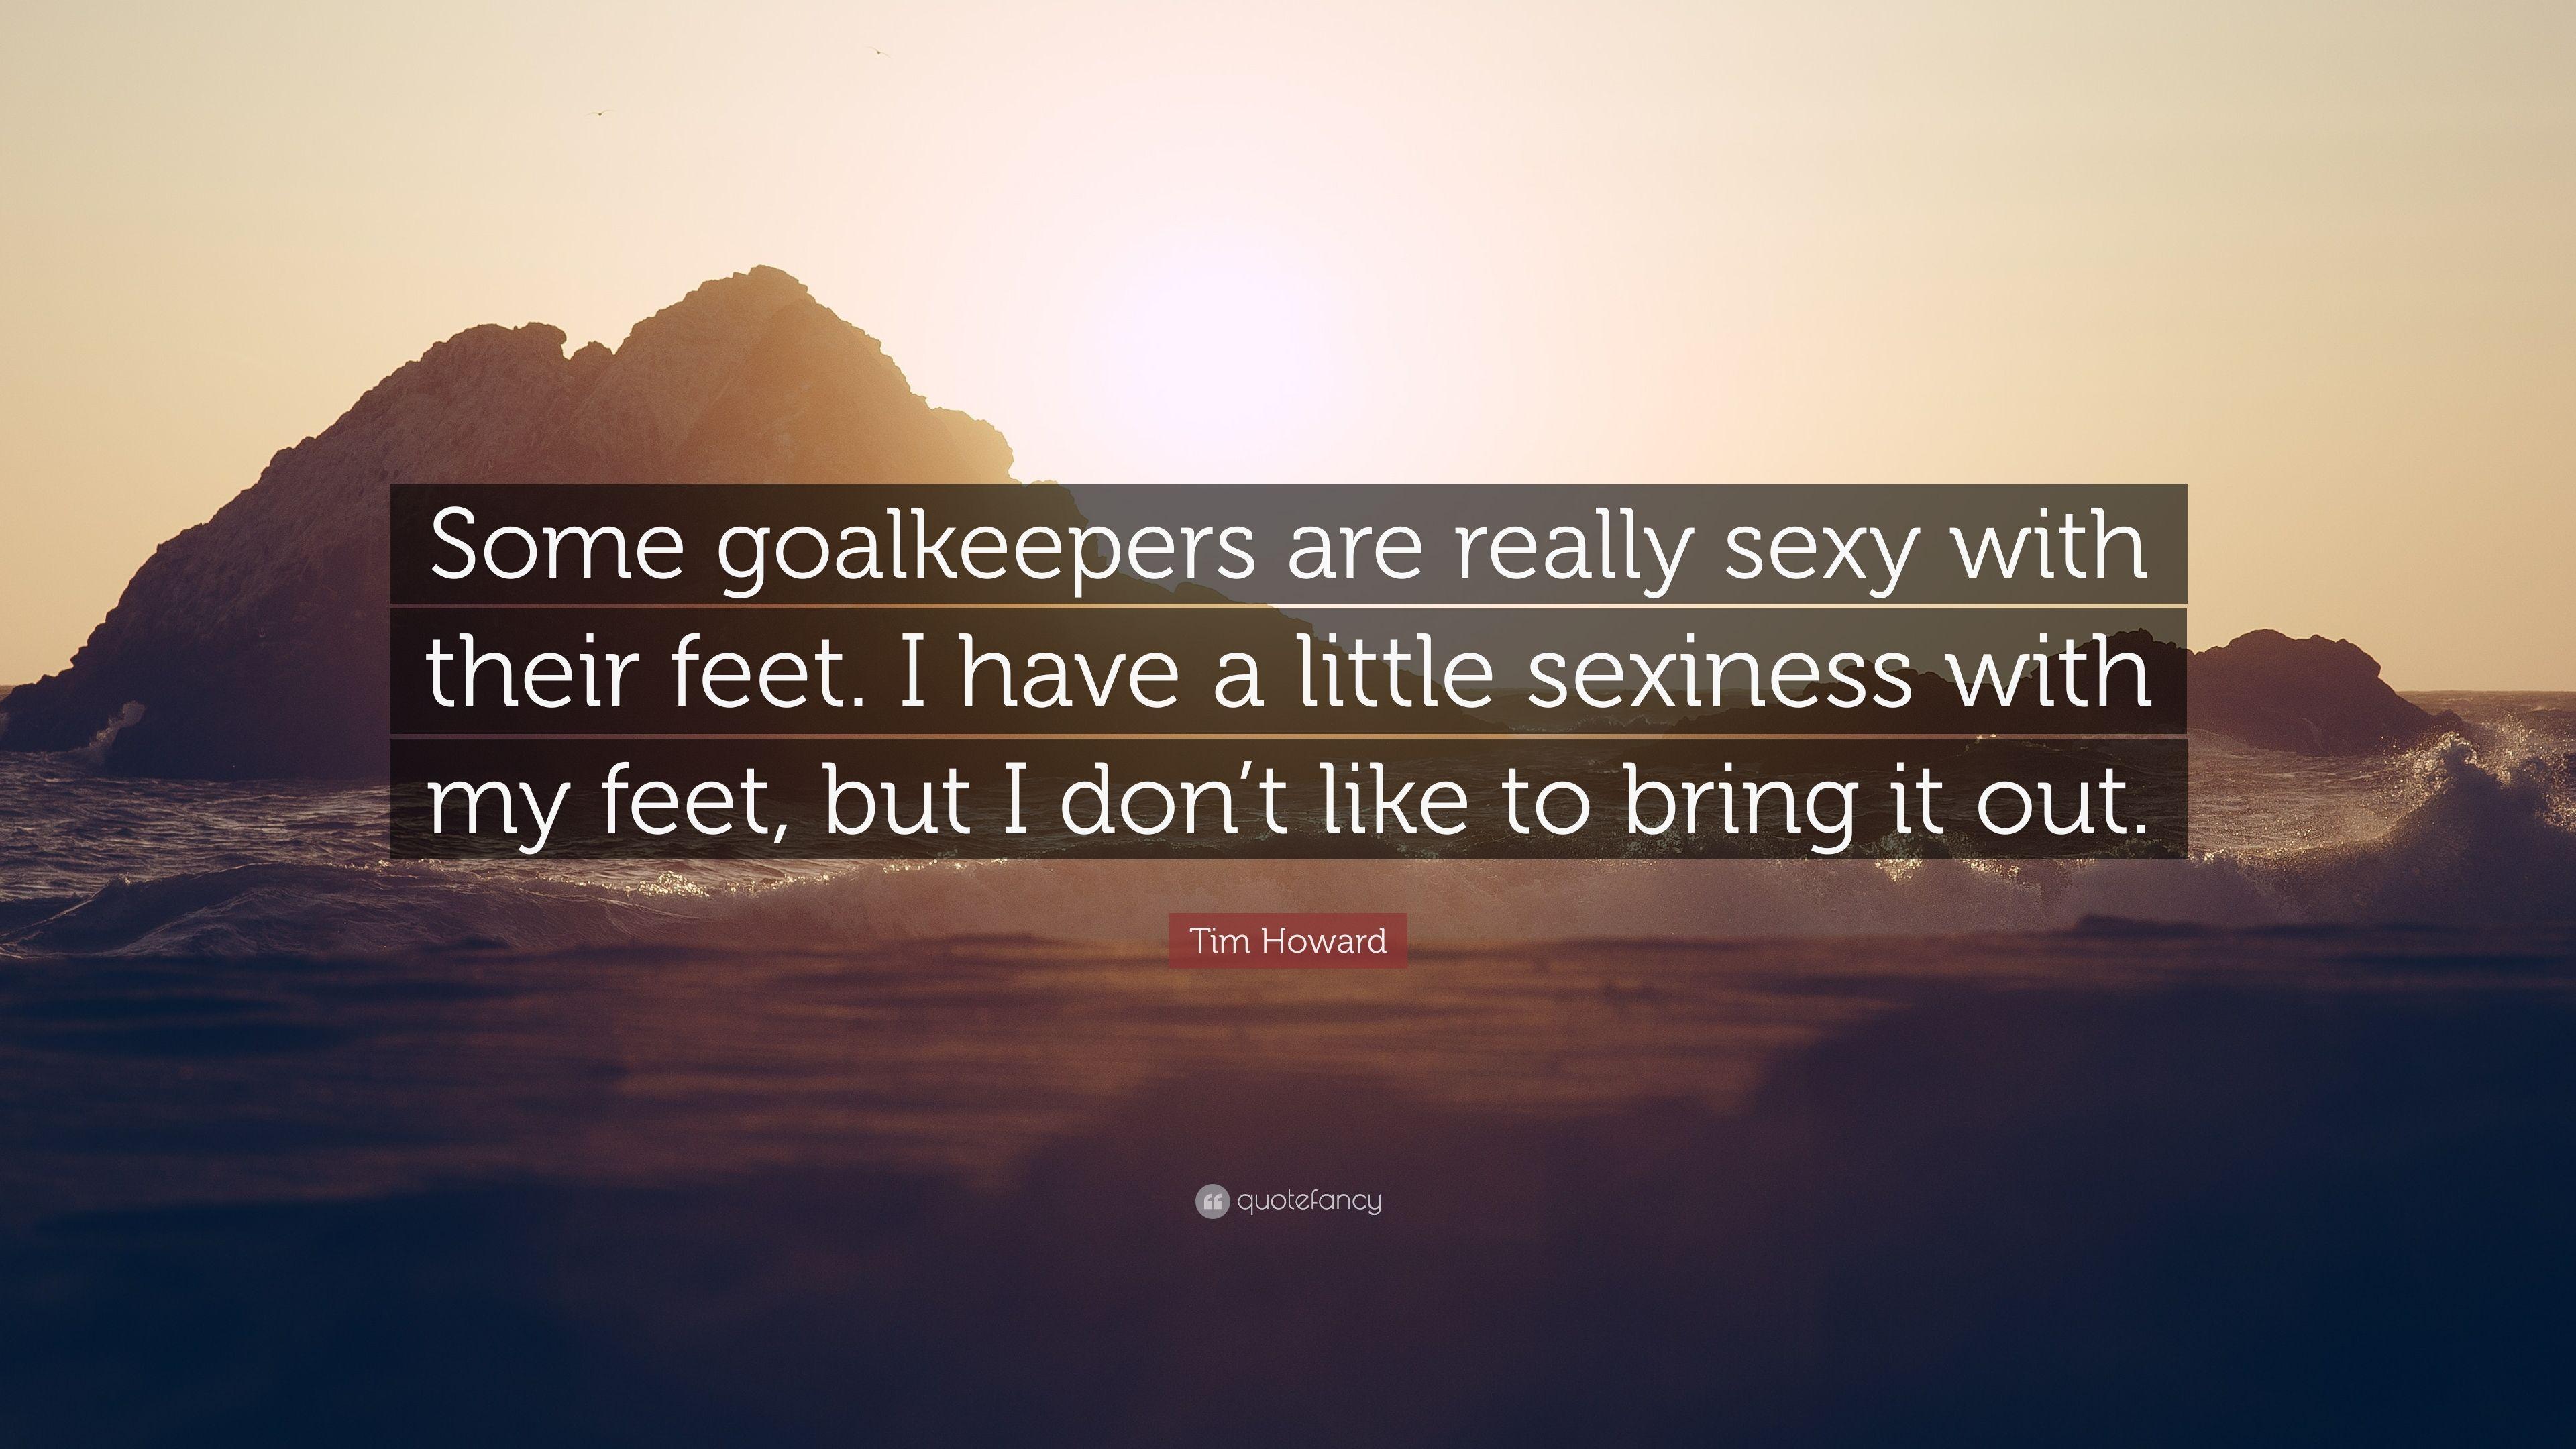 Tim Howard Quote: “Some goalkeepers are really with their feet